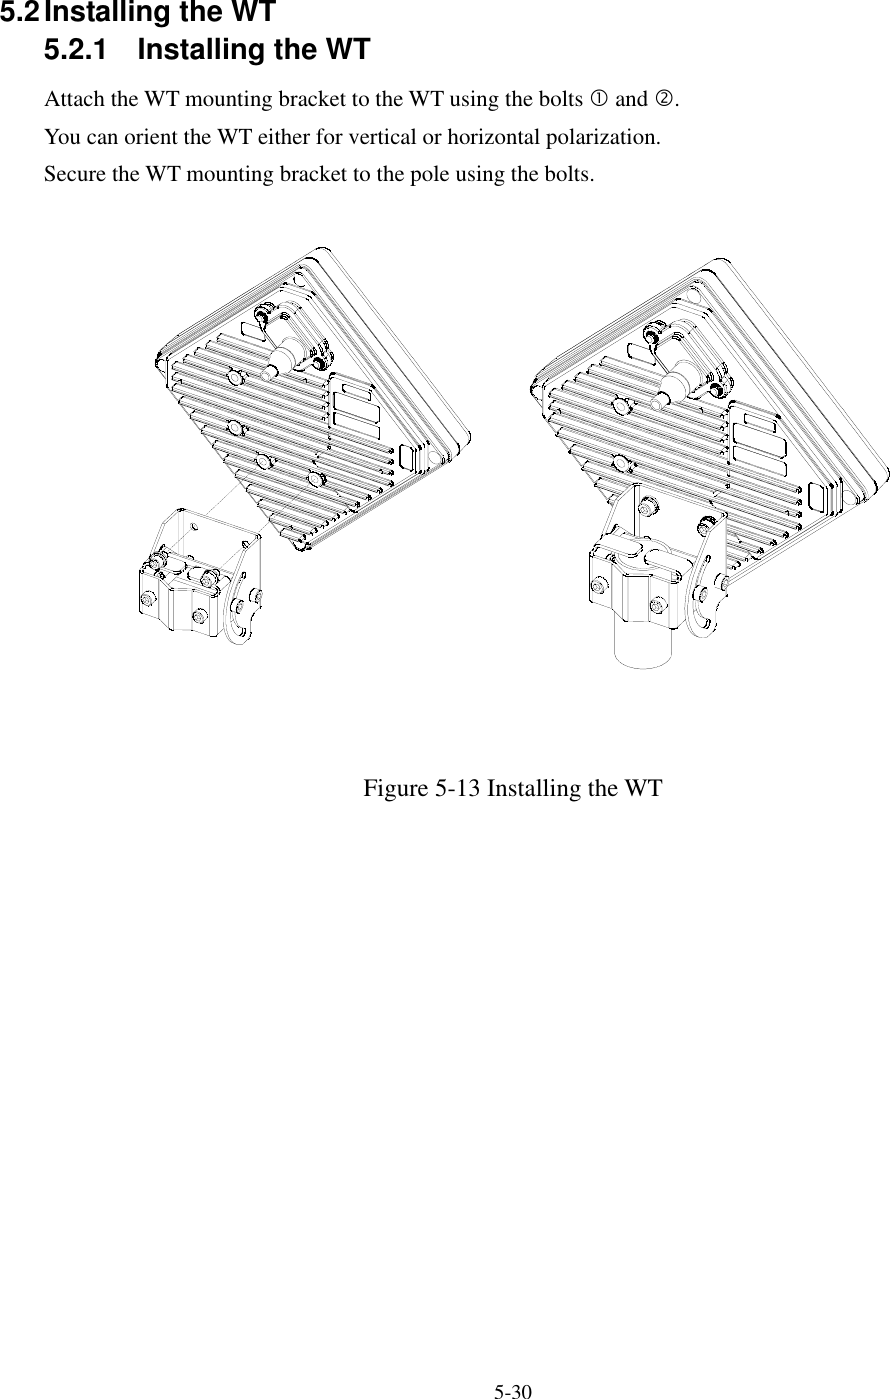   5-30    5.2 Installing the WT 5.2.1  Installing the WT Attach the WT mounting bracket to the WT using the bolts c and d. You can orient the WT either for vertical or horizontal polarization. Secure the WT mounting bracket to the pole using the bolts.   Figure 5-13 Installing the WT     